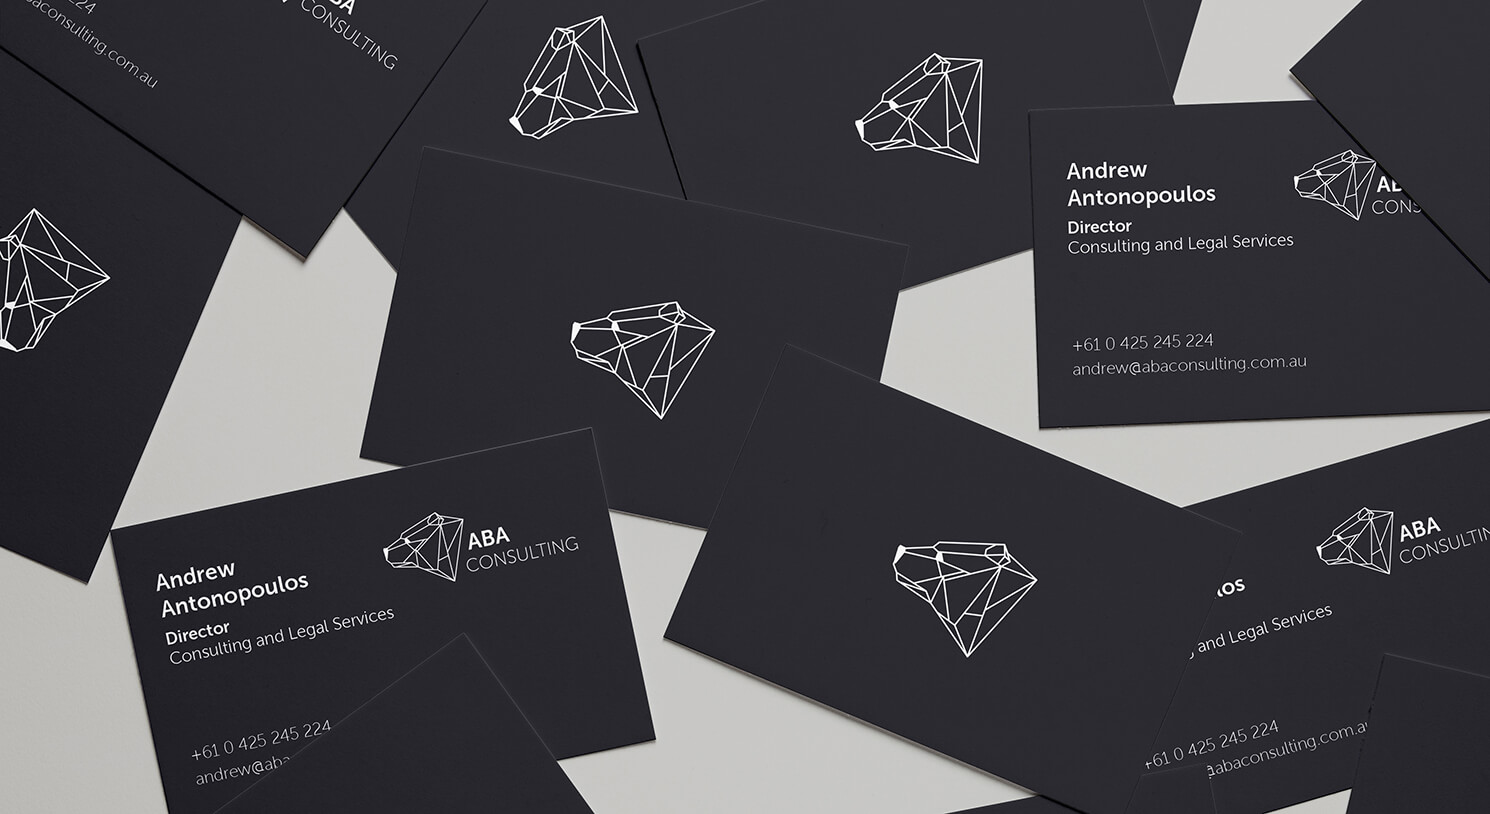 ABA Consulting - Business Card Design